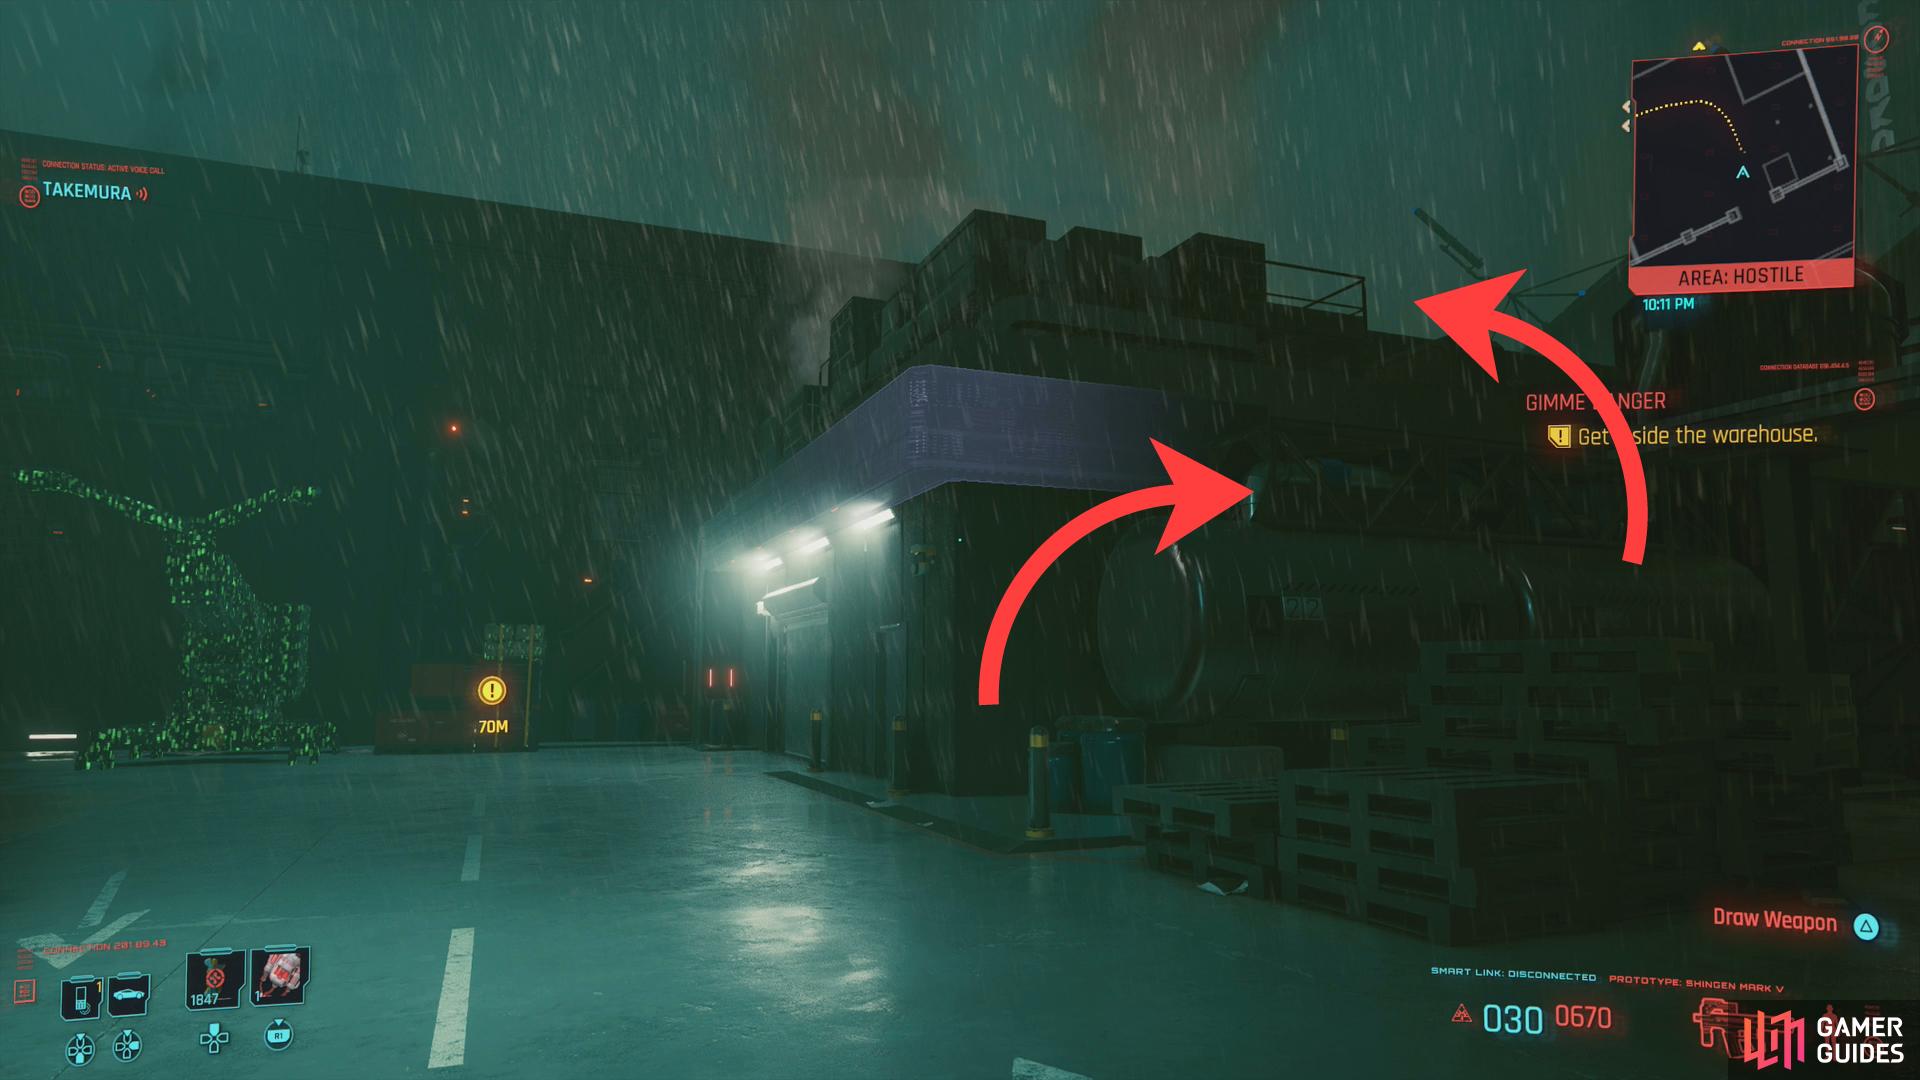 You can jump onto a fuel tank, then onto the roof of a building adjacent to the warehouse,